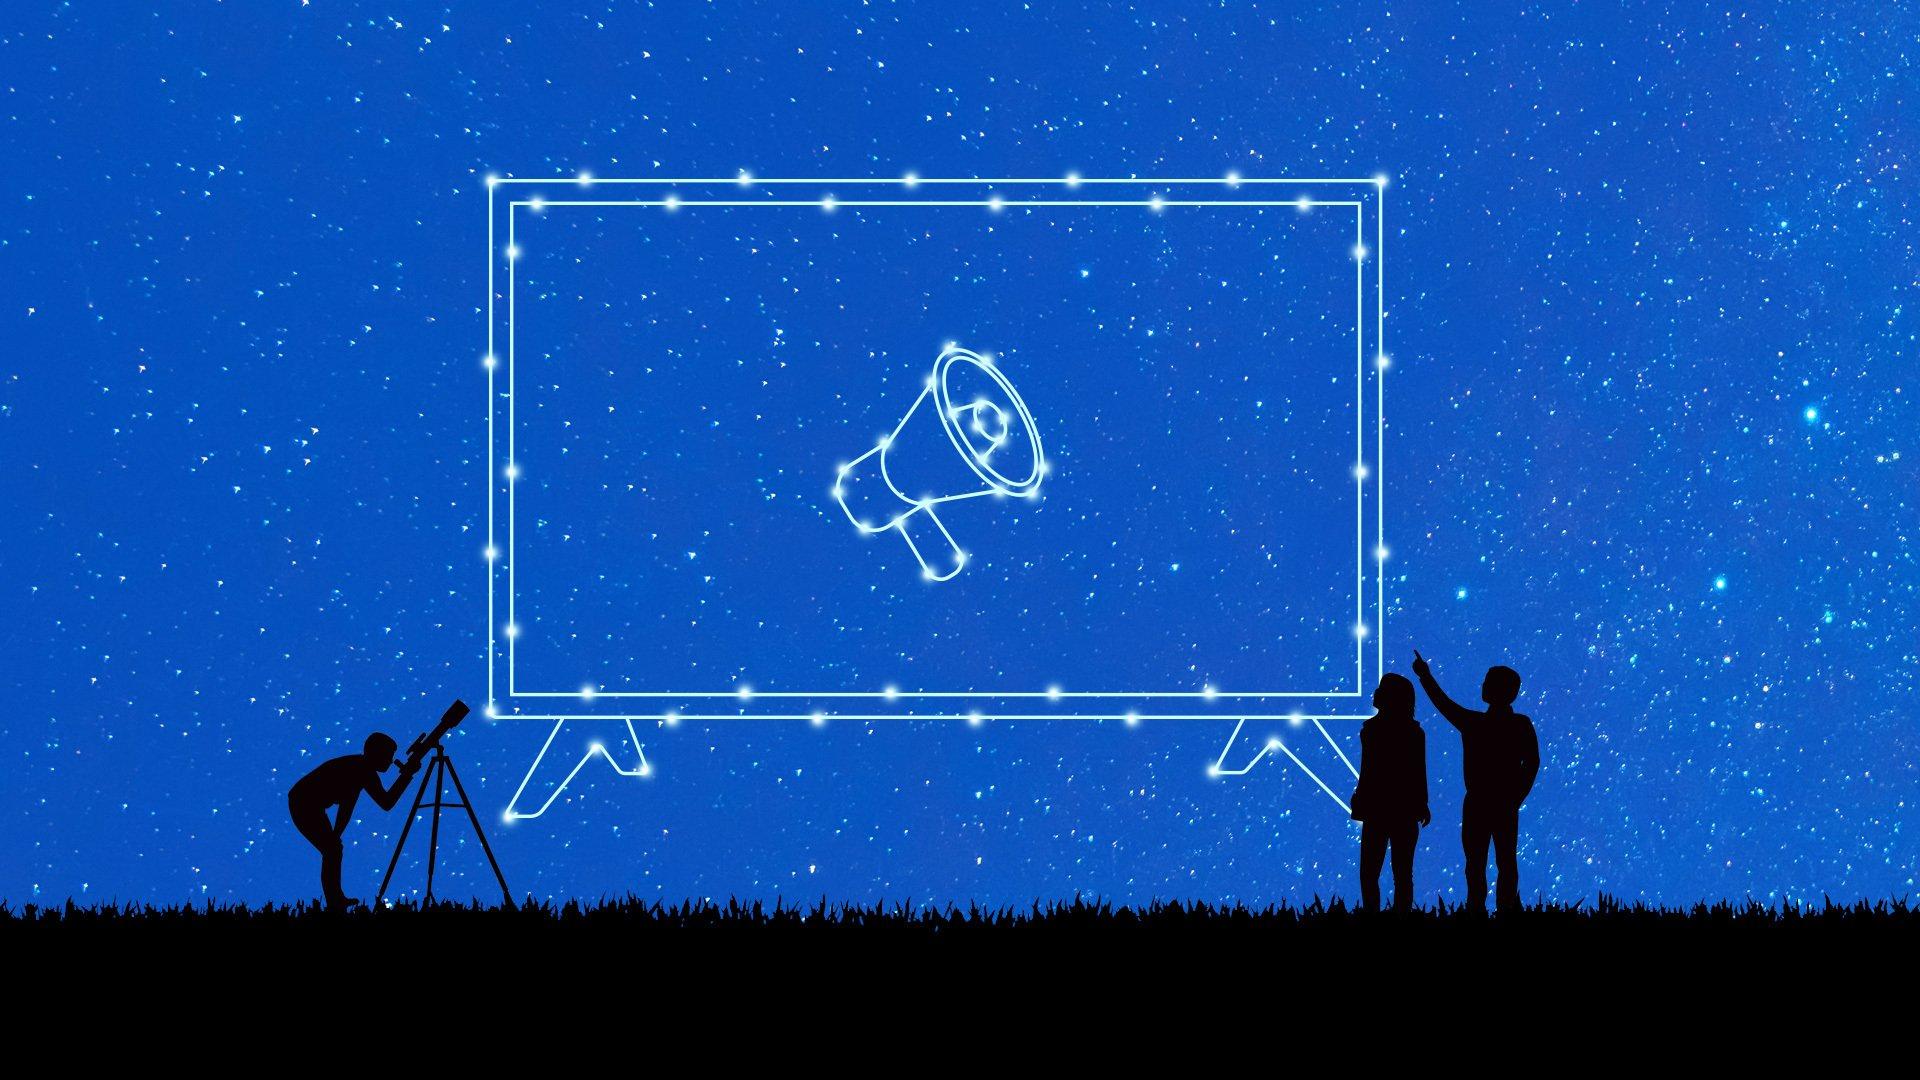 A large tv with a megaphone on the screen appears in the night sky while three bystanders observe